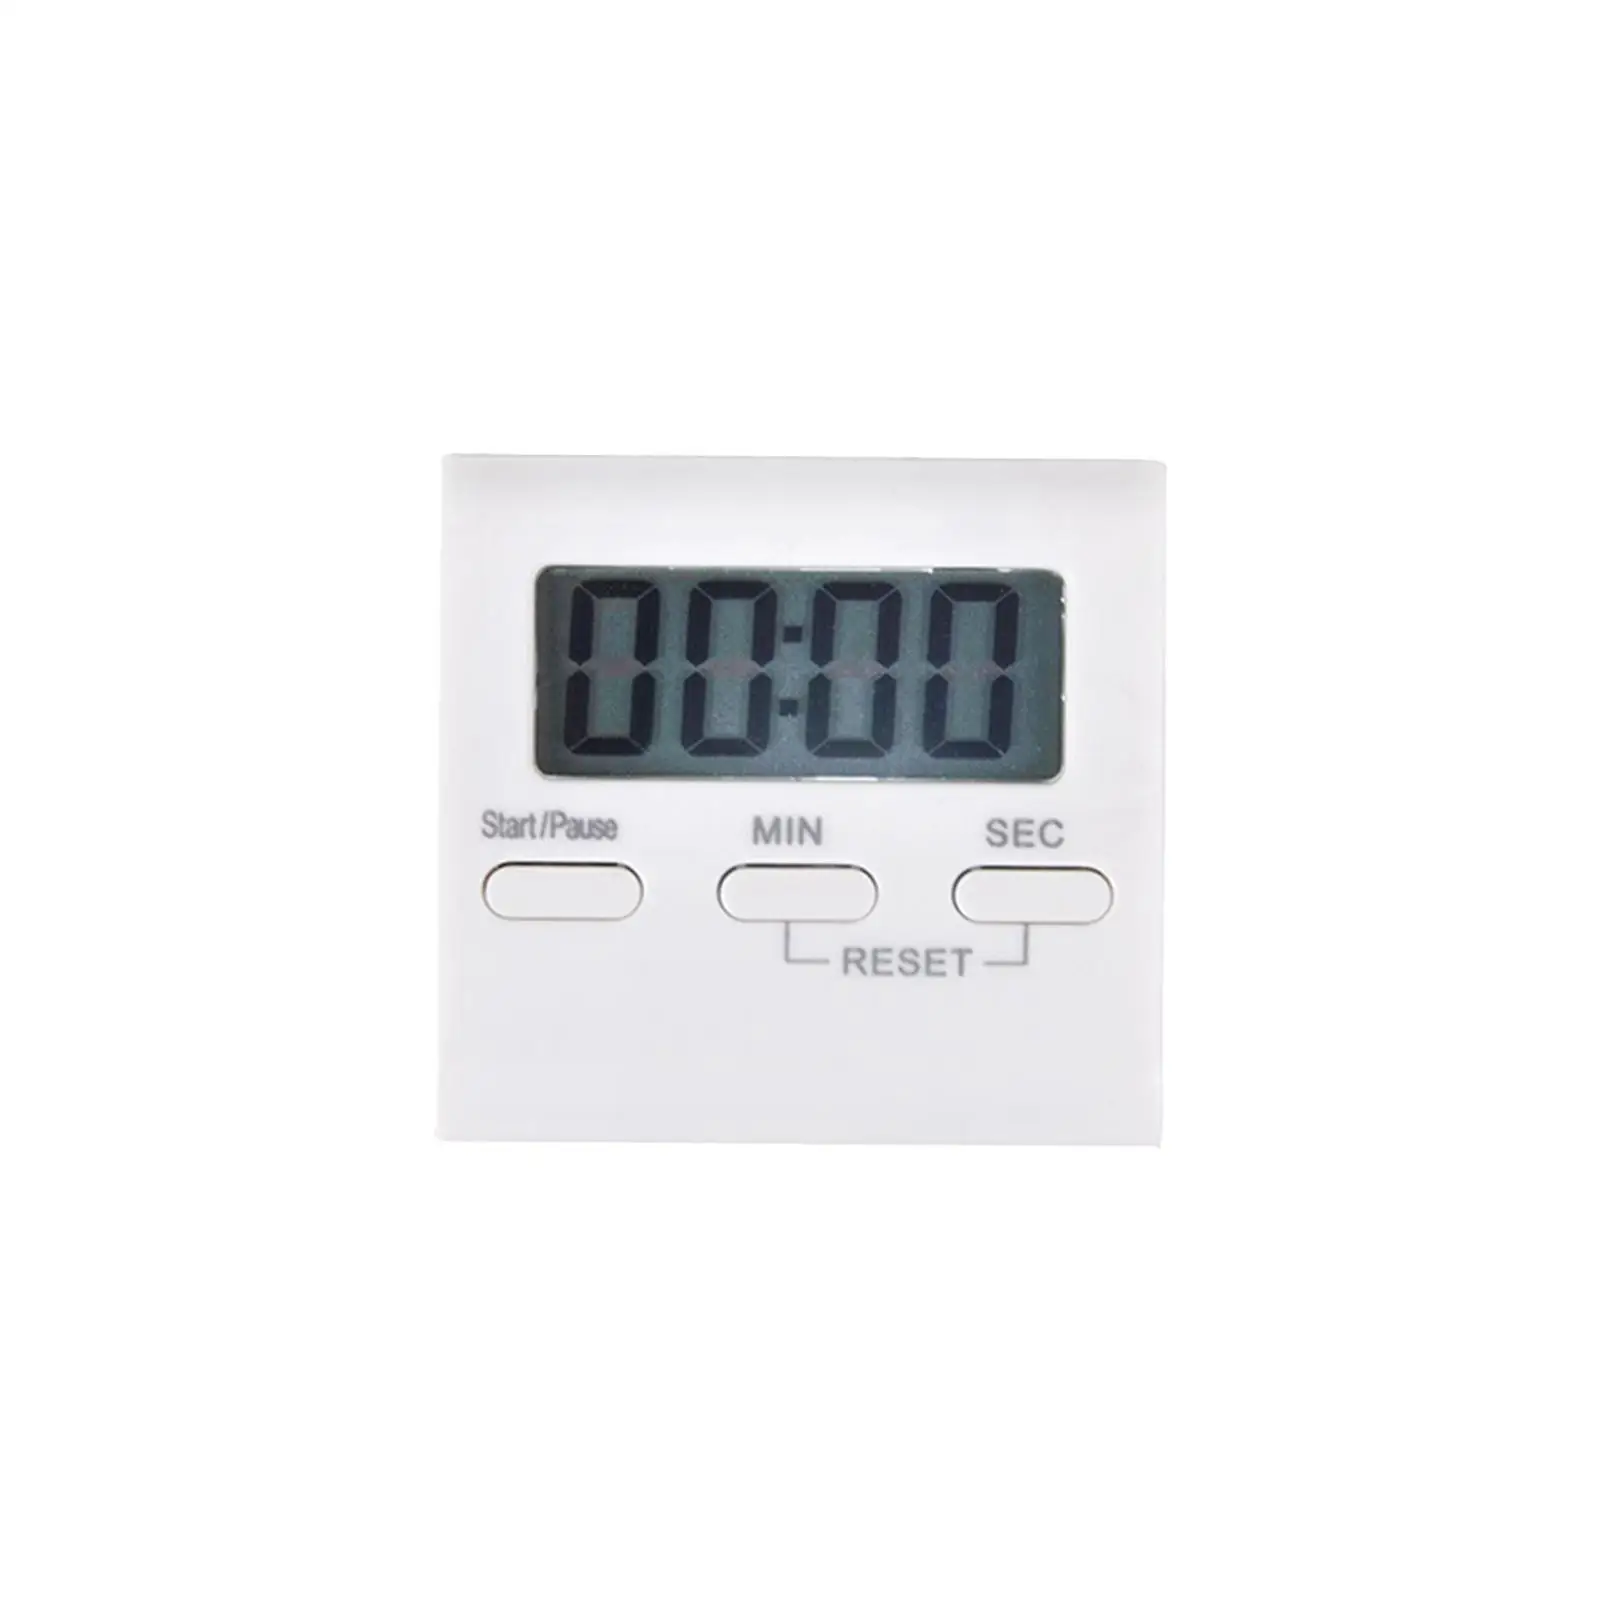 Cooking Timer Multifunction Cooking Tools Memory Function Baking Clock Digital Timer for Games Sports Cooking Baking